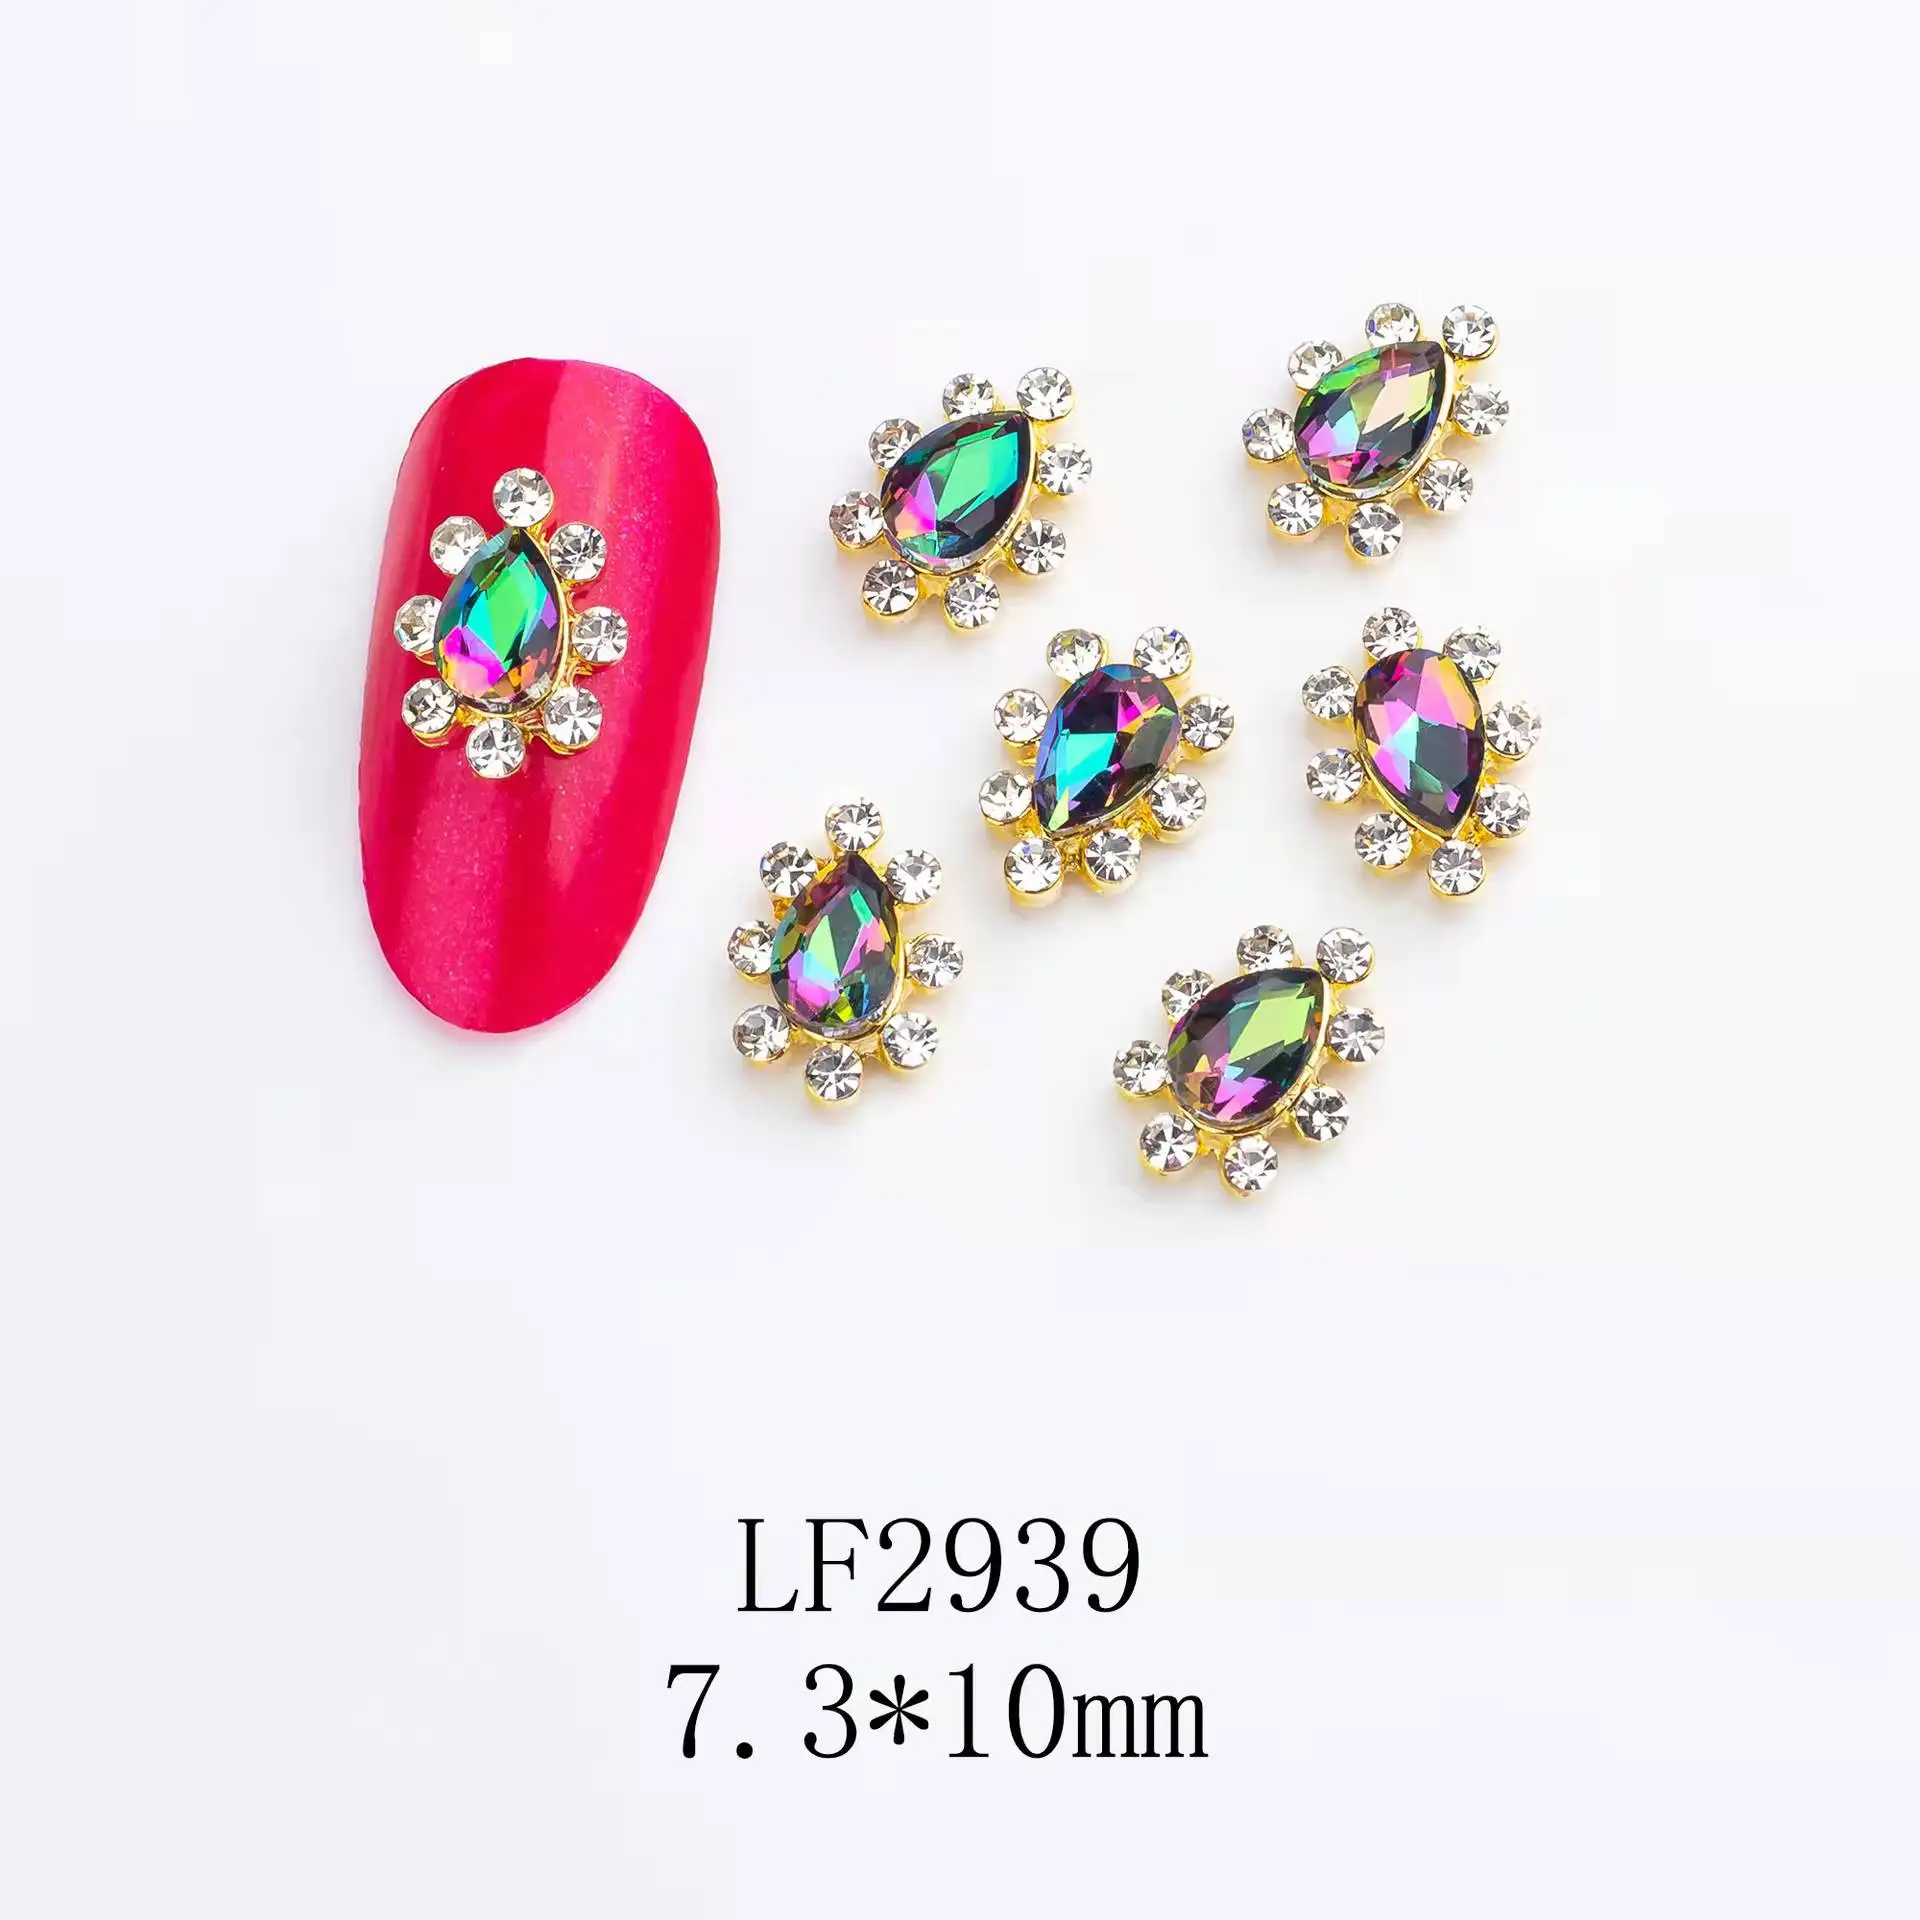 Enlarge 100Pcs Royal Crown Shiny Nail Art Rhinestones Crystal Romantic Design 3D Charms Crown/Heart/Snow Jewelry For Nails Accessories